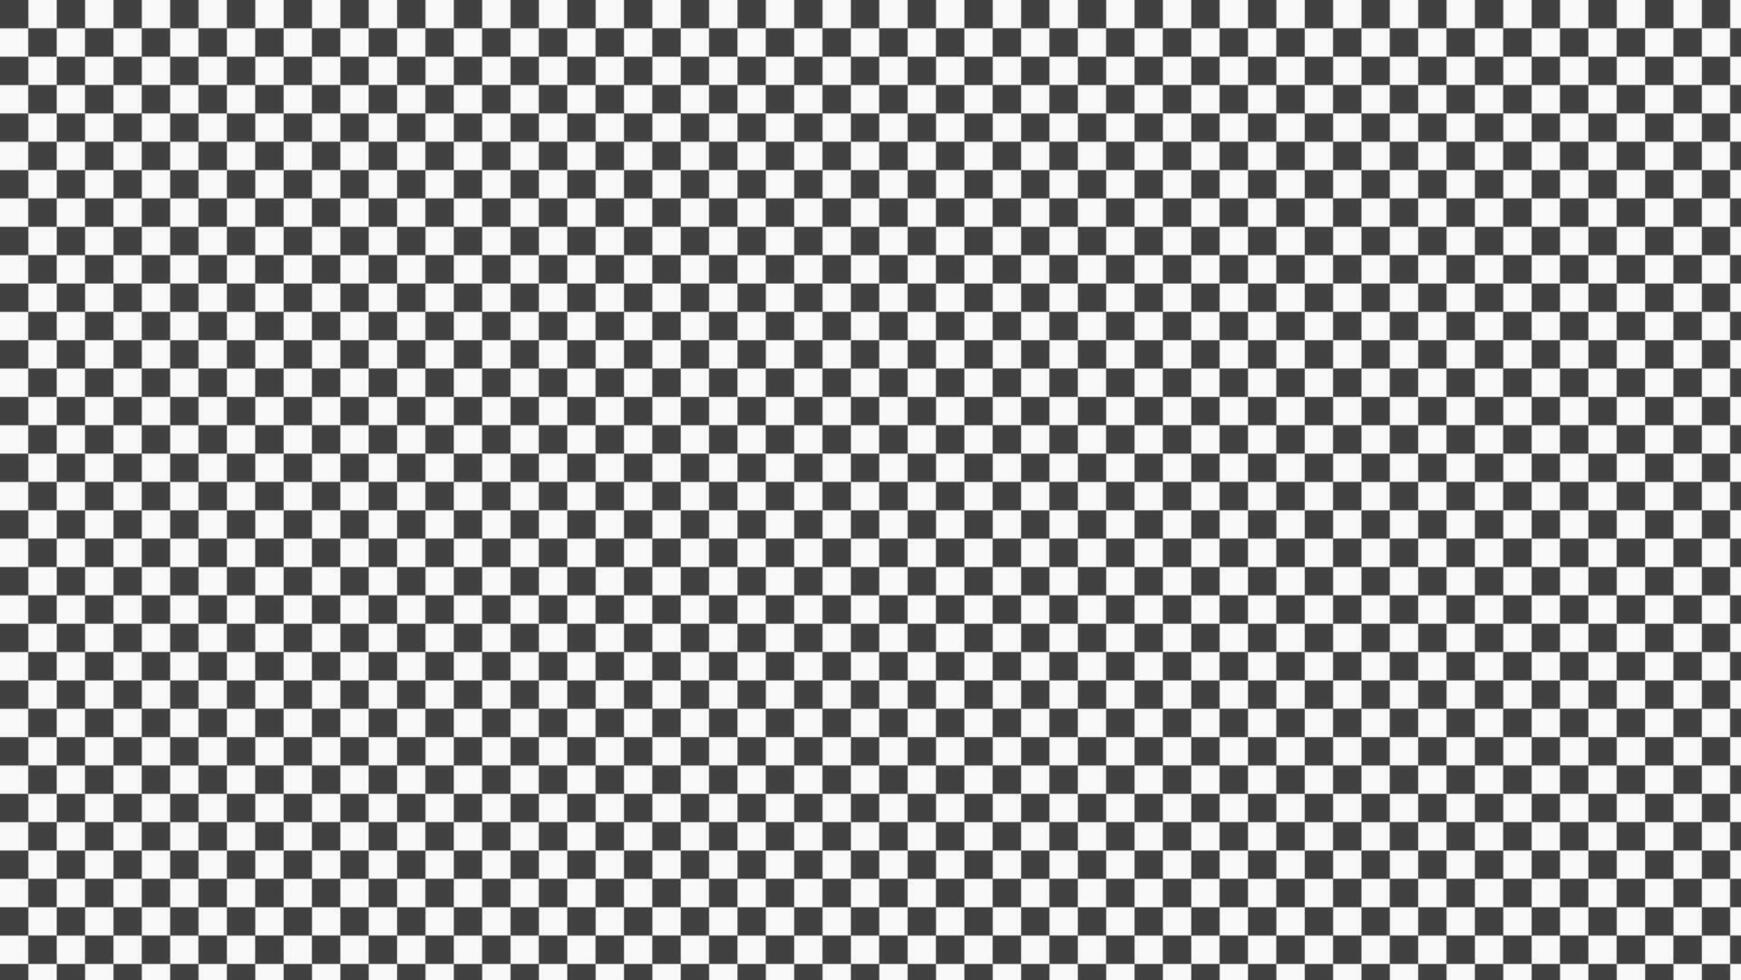 chekers background pattern vector